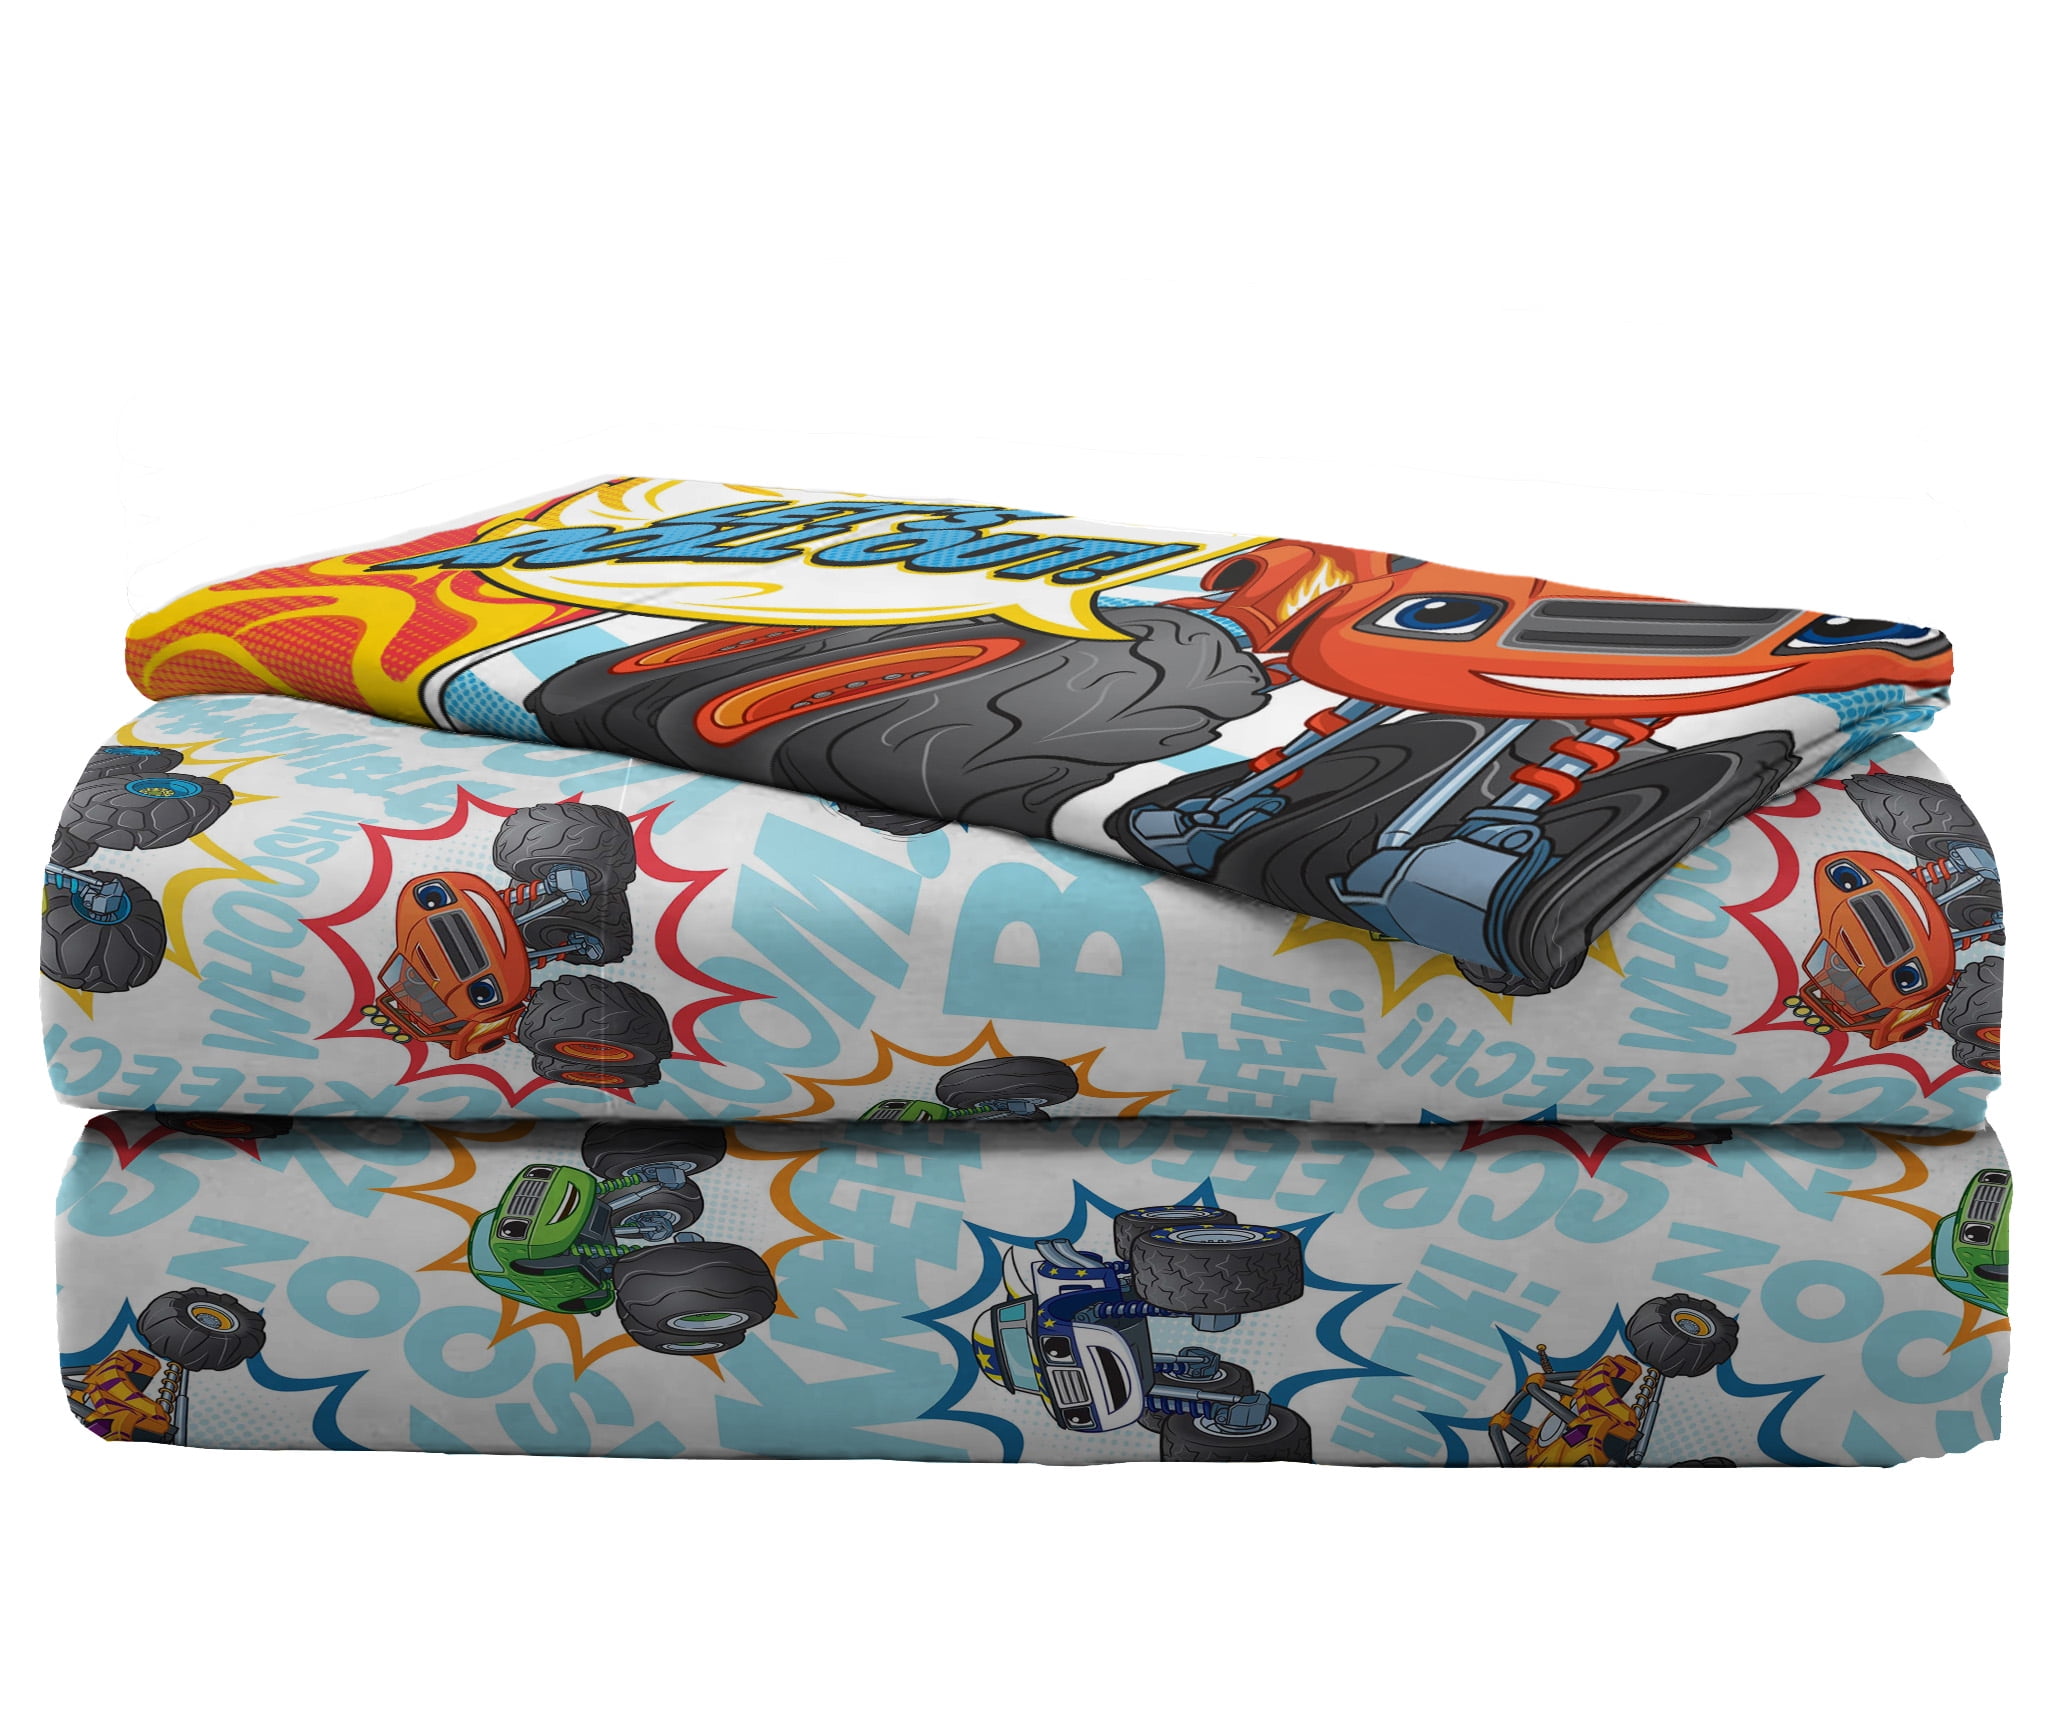 Blaze Off to the Races Trucks Kids Multi-Color Toddler Bed in a